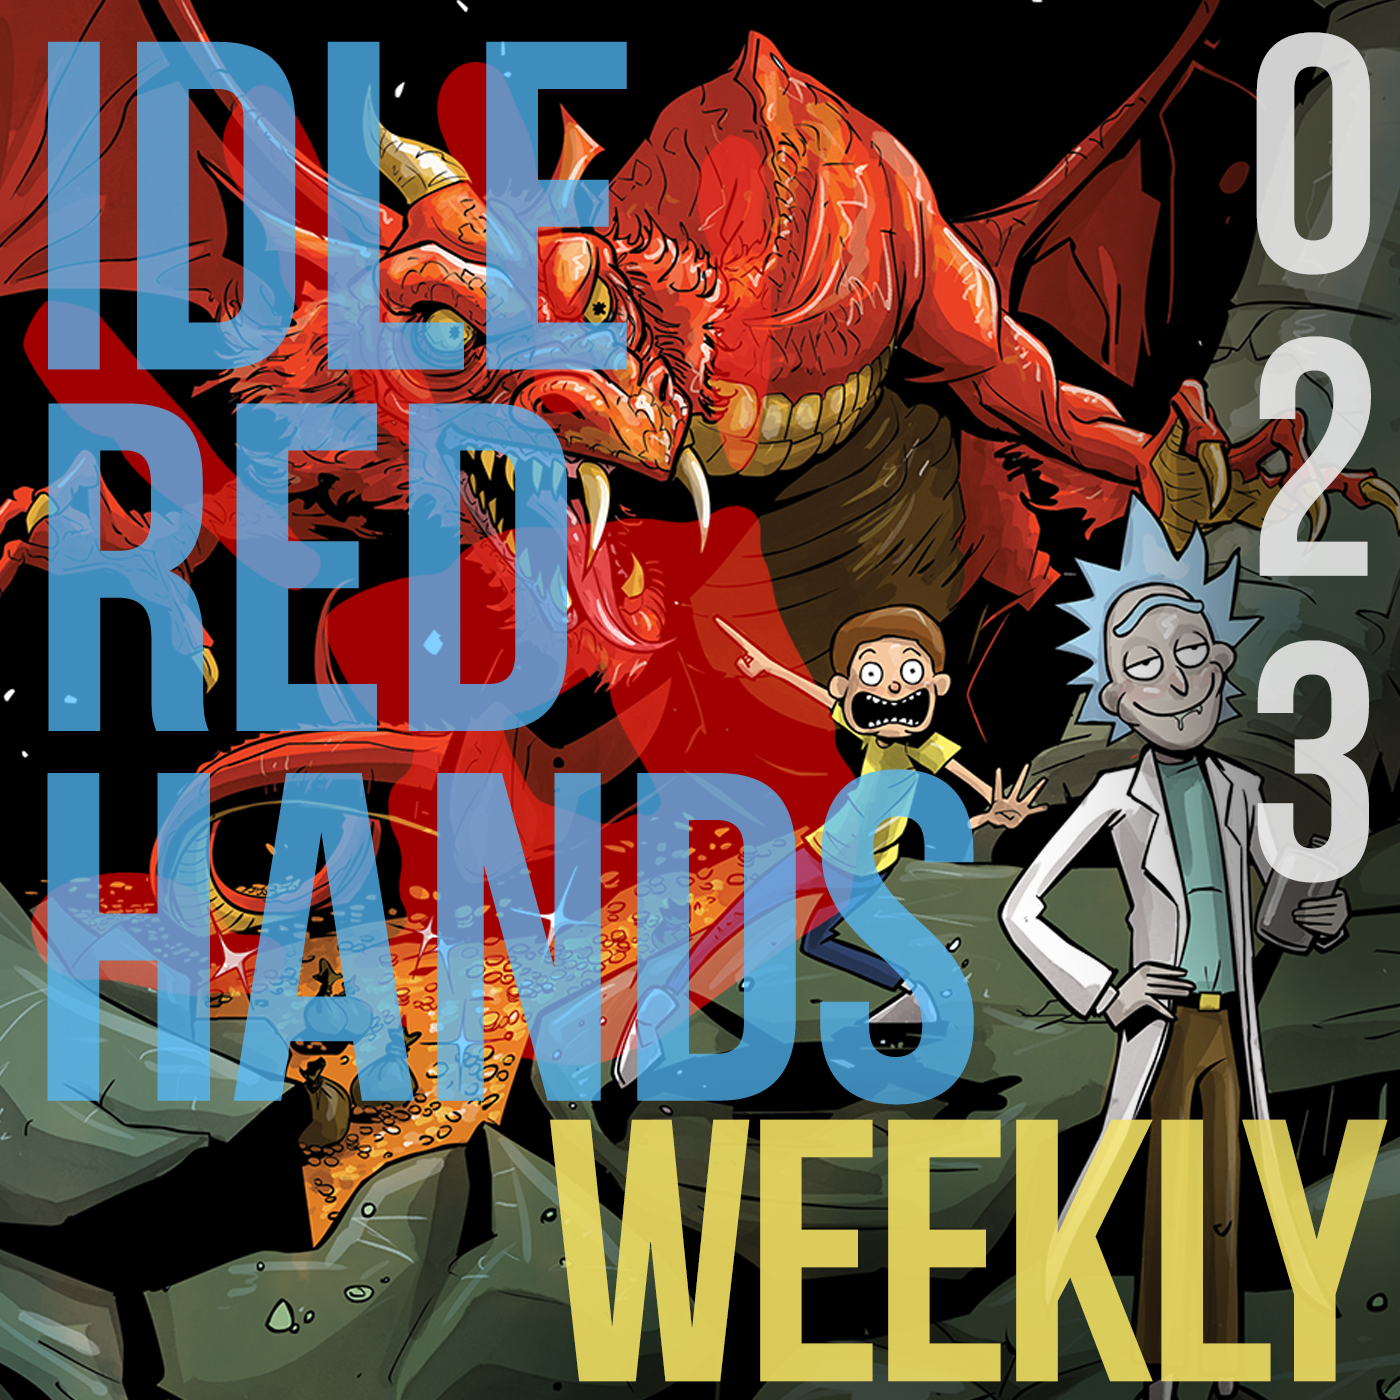 Idle Red Hands Weekly